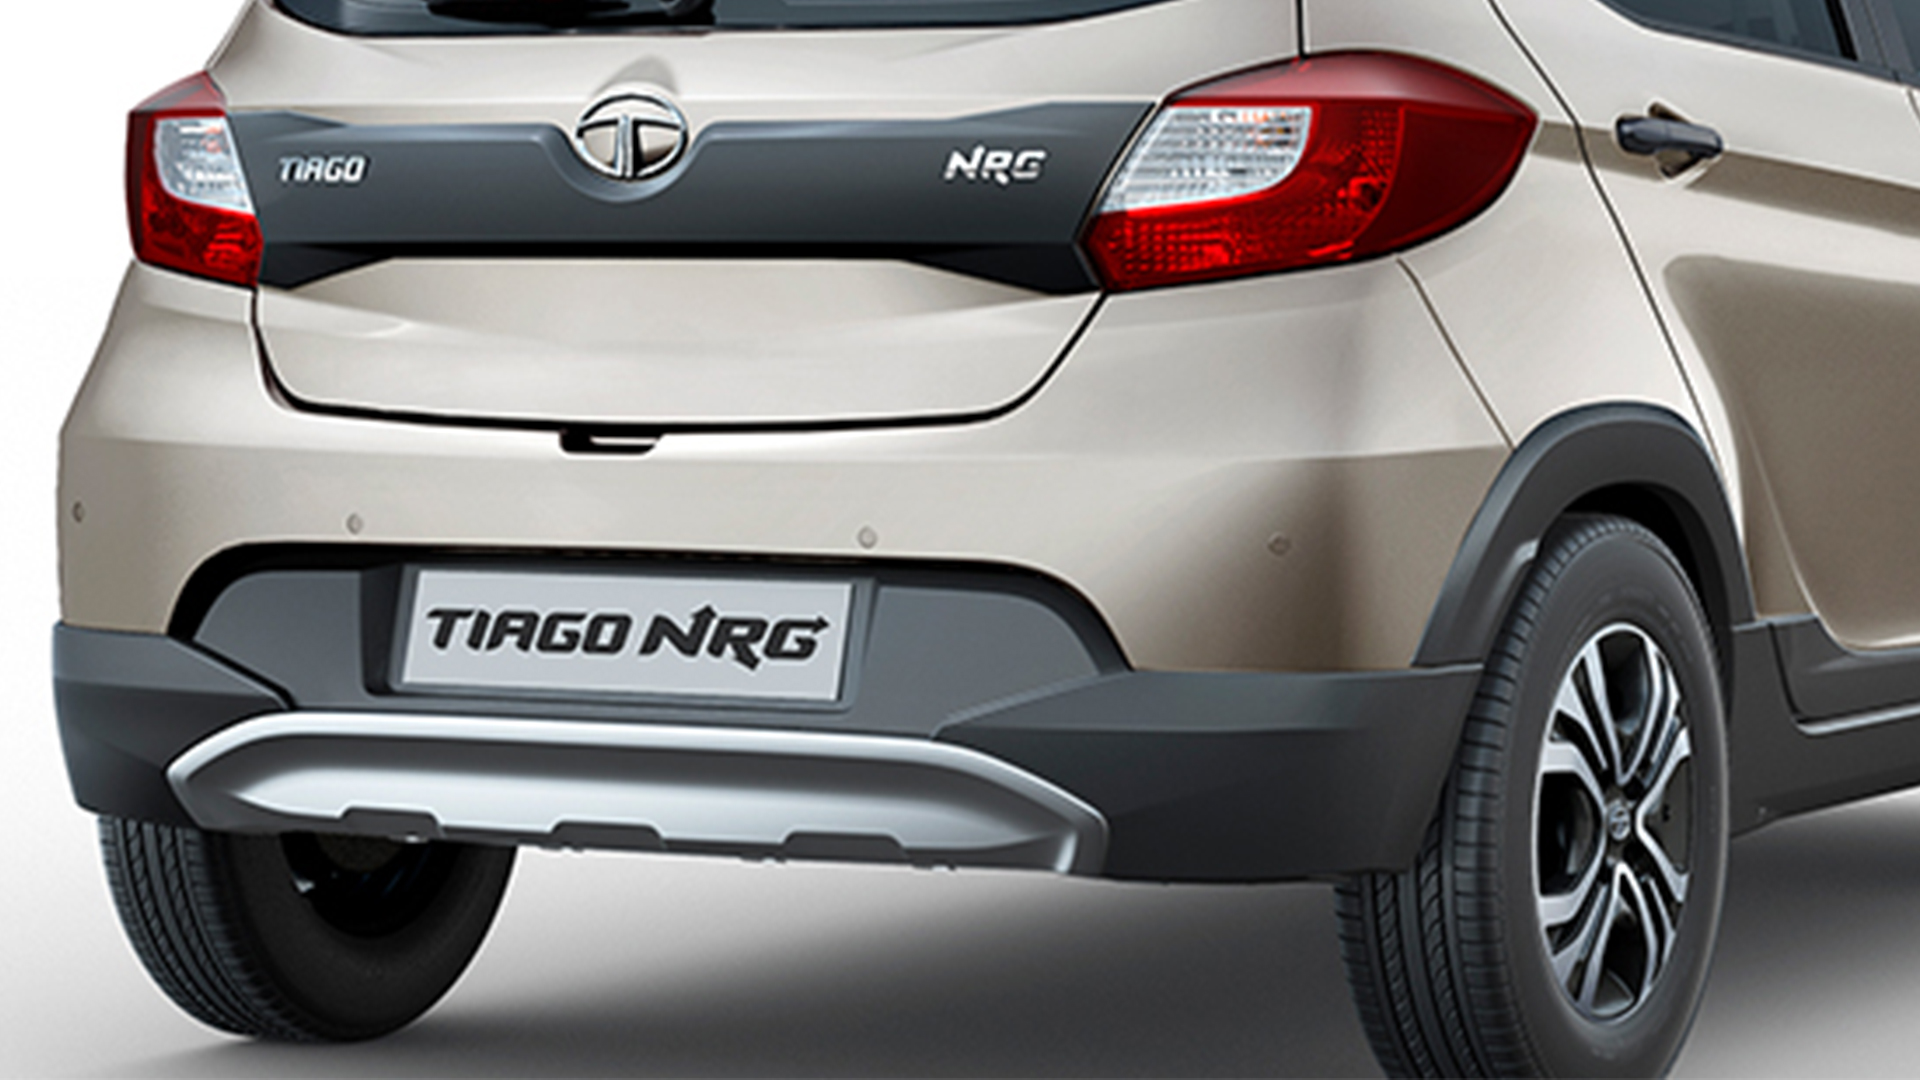 Tata Tiago NRG 2019 - Price, Mileage, Reviews, Specification, Gallery - Overdrive